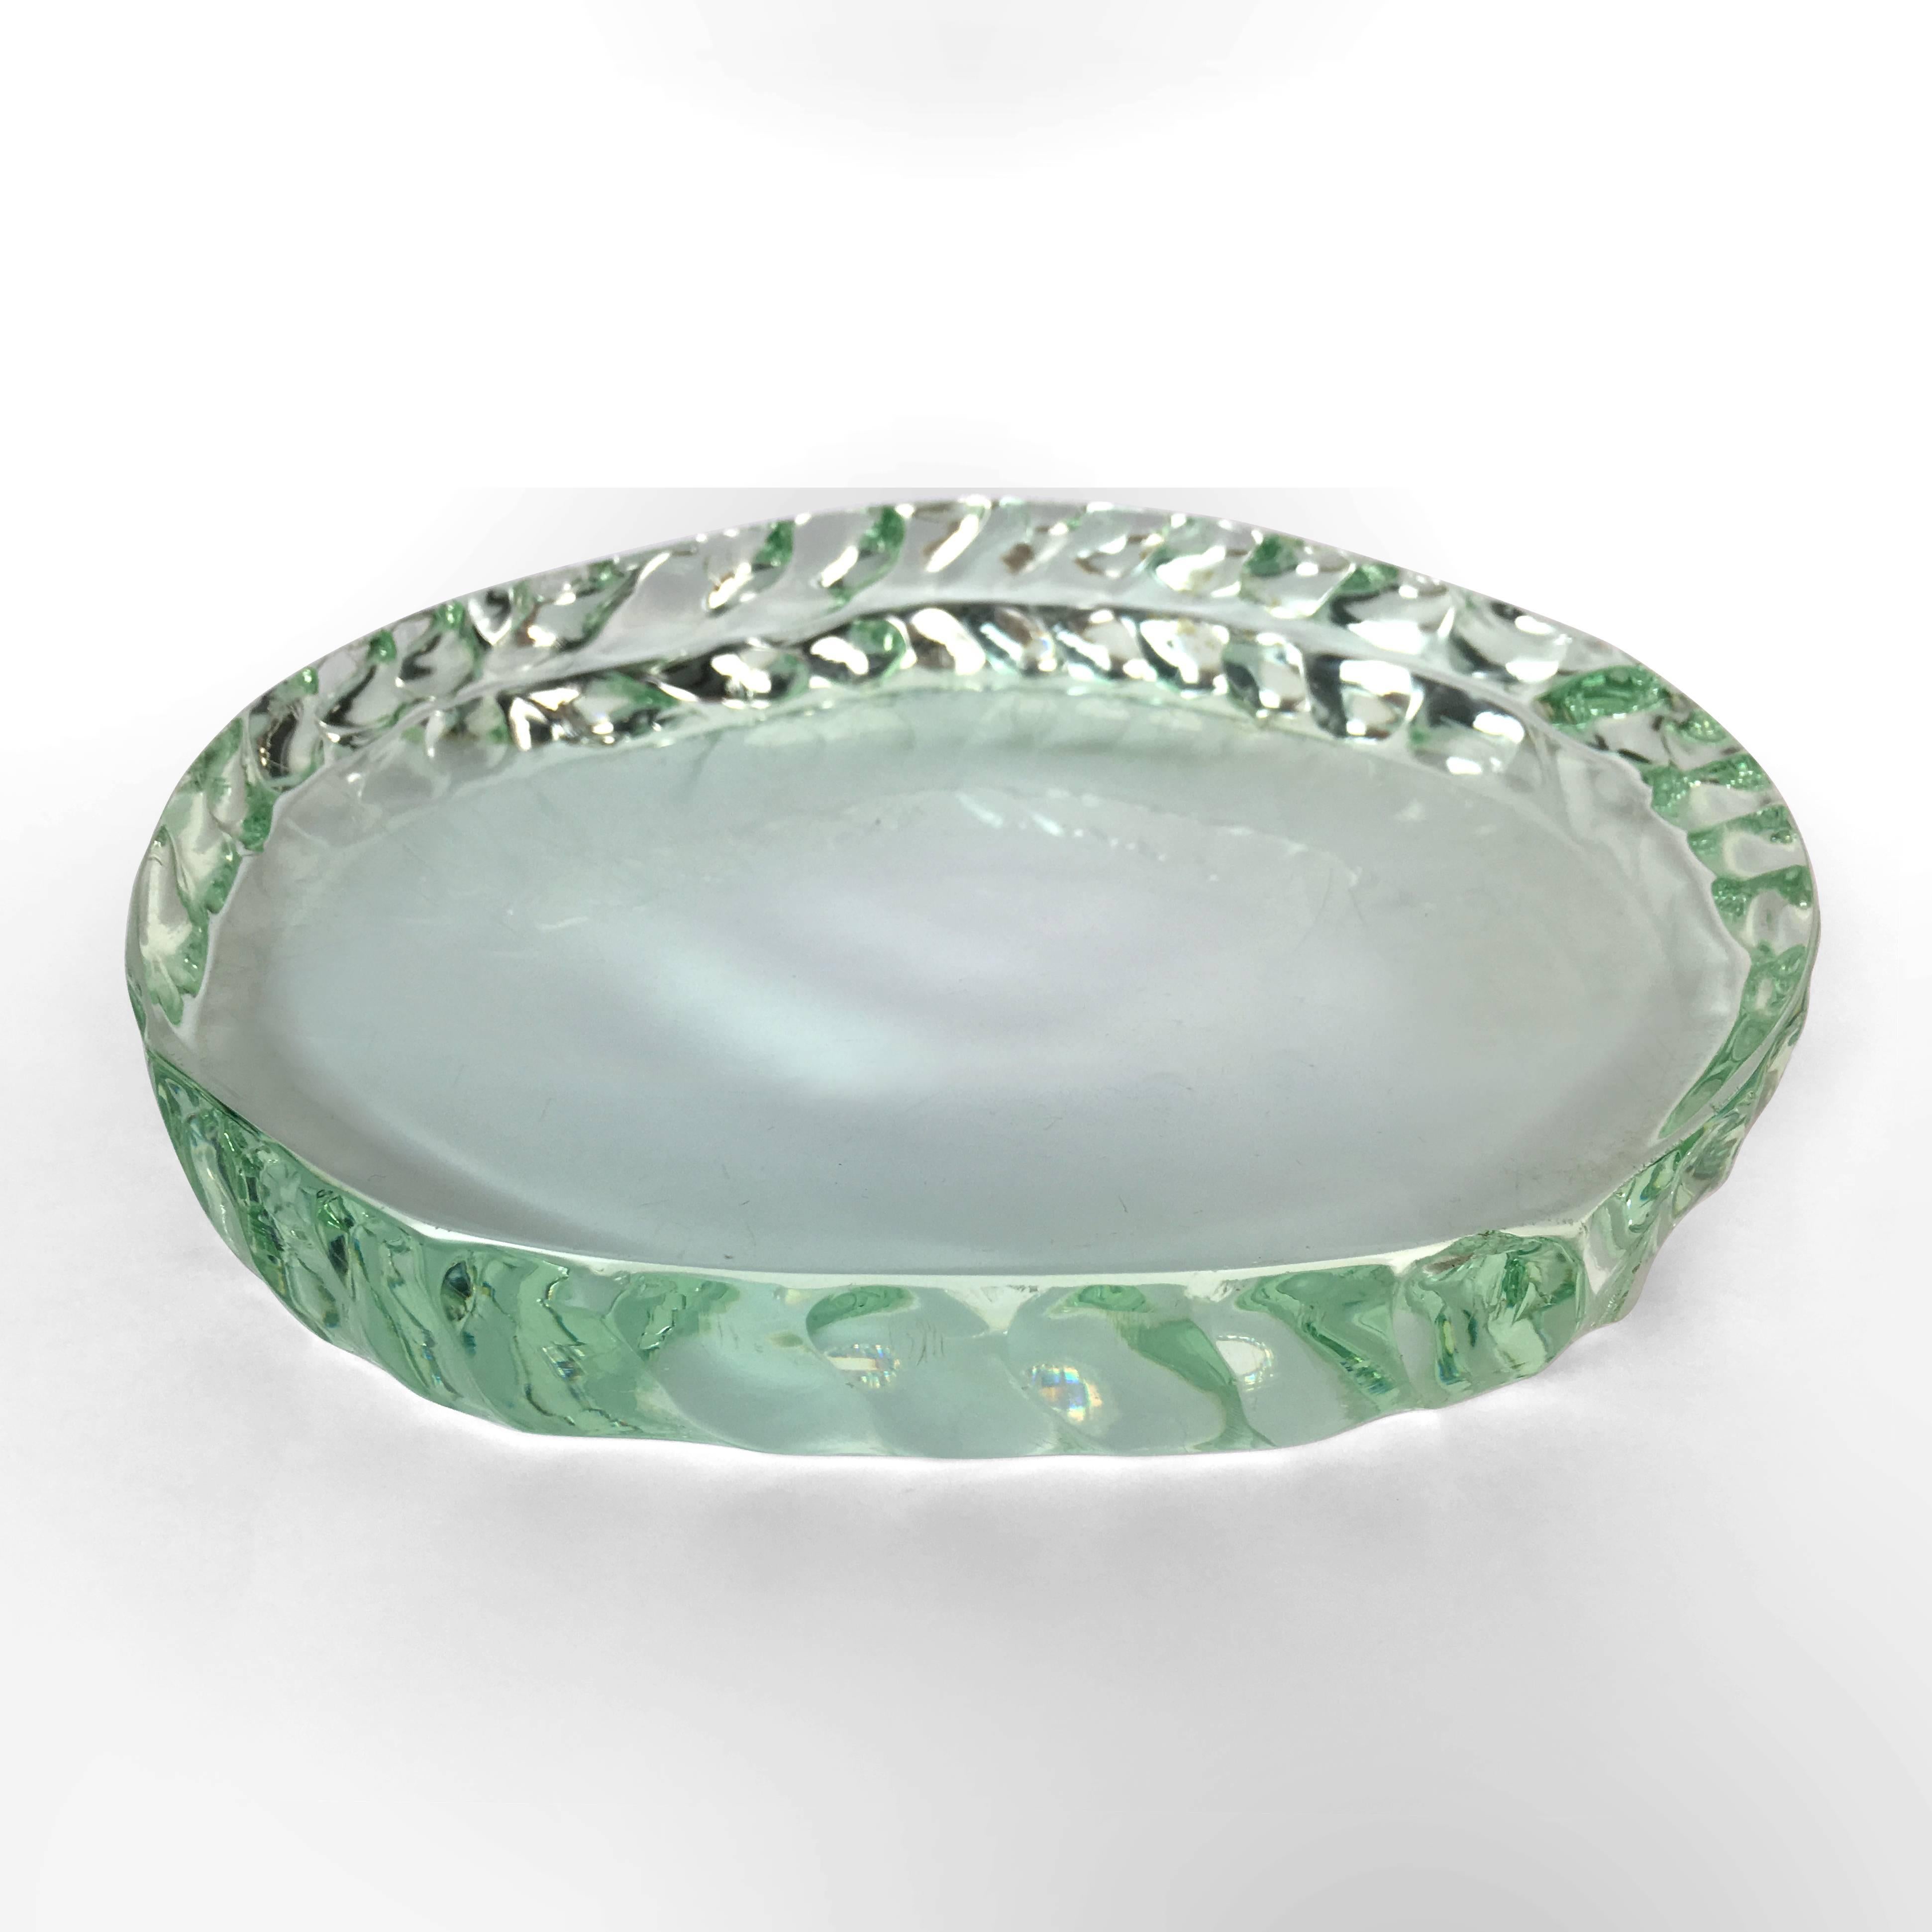 Thick aquamarine glass ashtray (probably by Fontana Arte) made in 1960s.